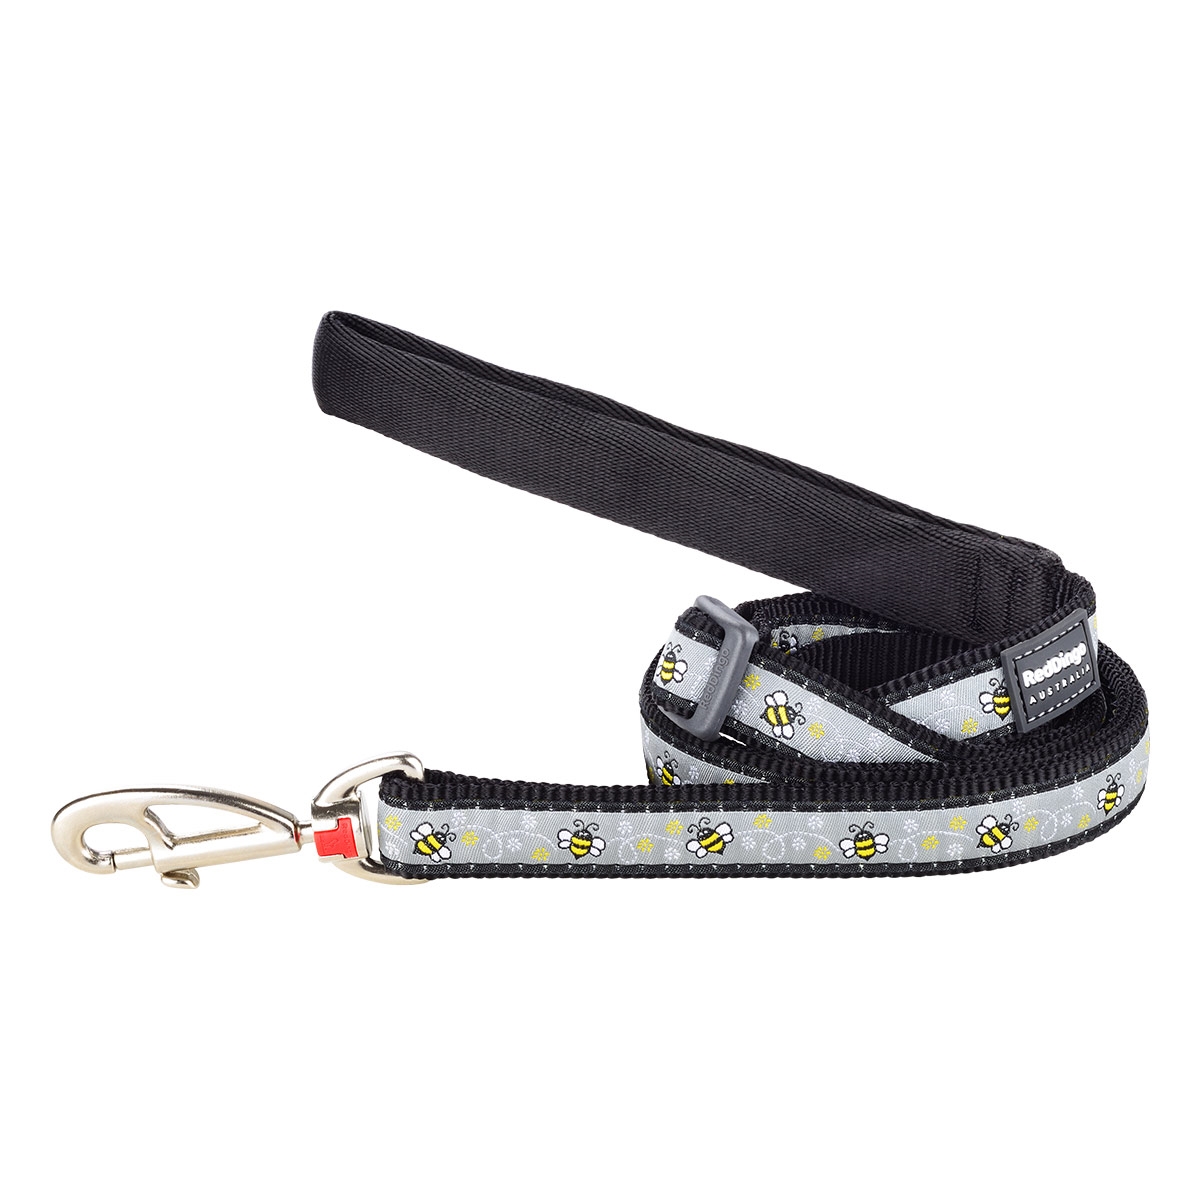 Picture of Red Dingo L6-BM-BB-15 Dog Lead Design Bumble Bee Black - Small 6ft